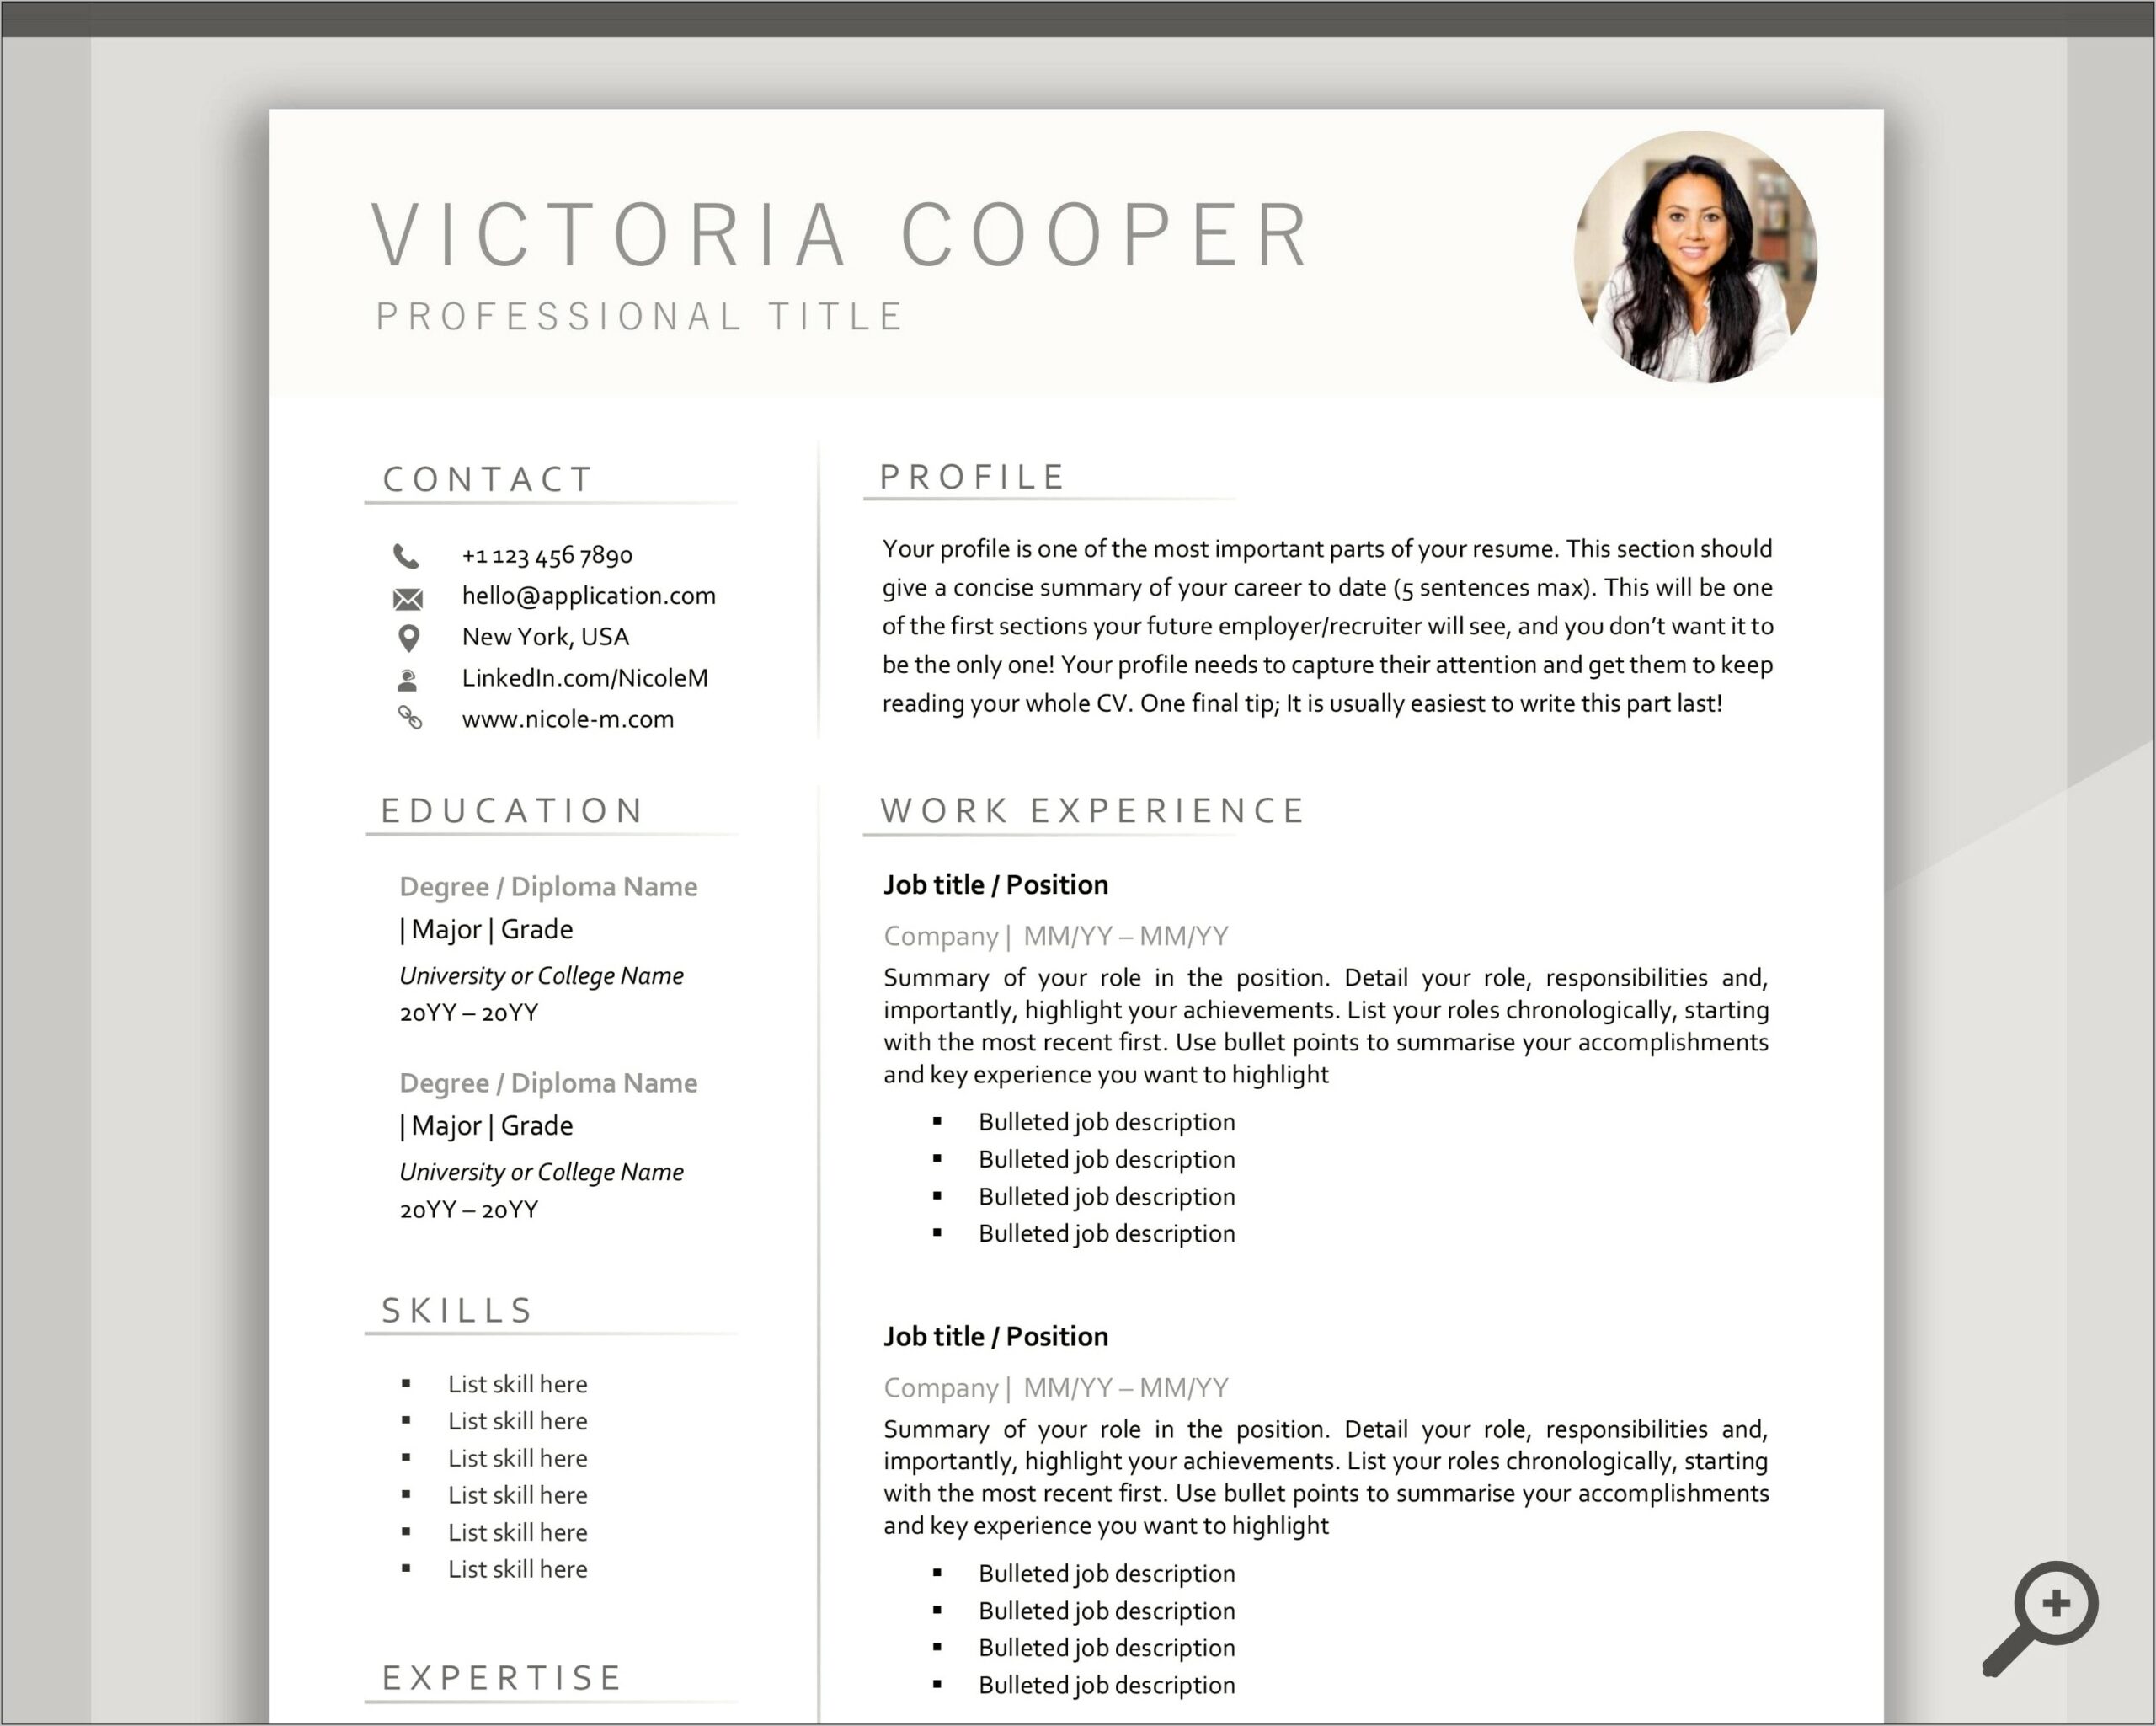 Company Or Job Title First On Resume